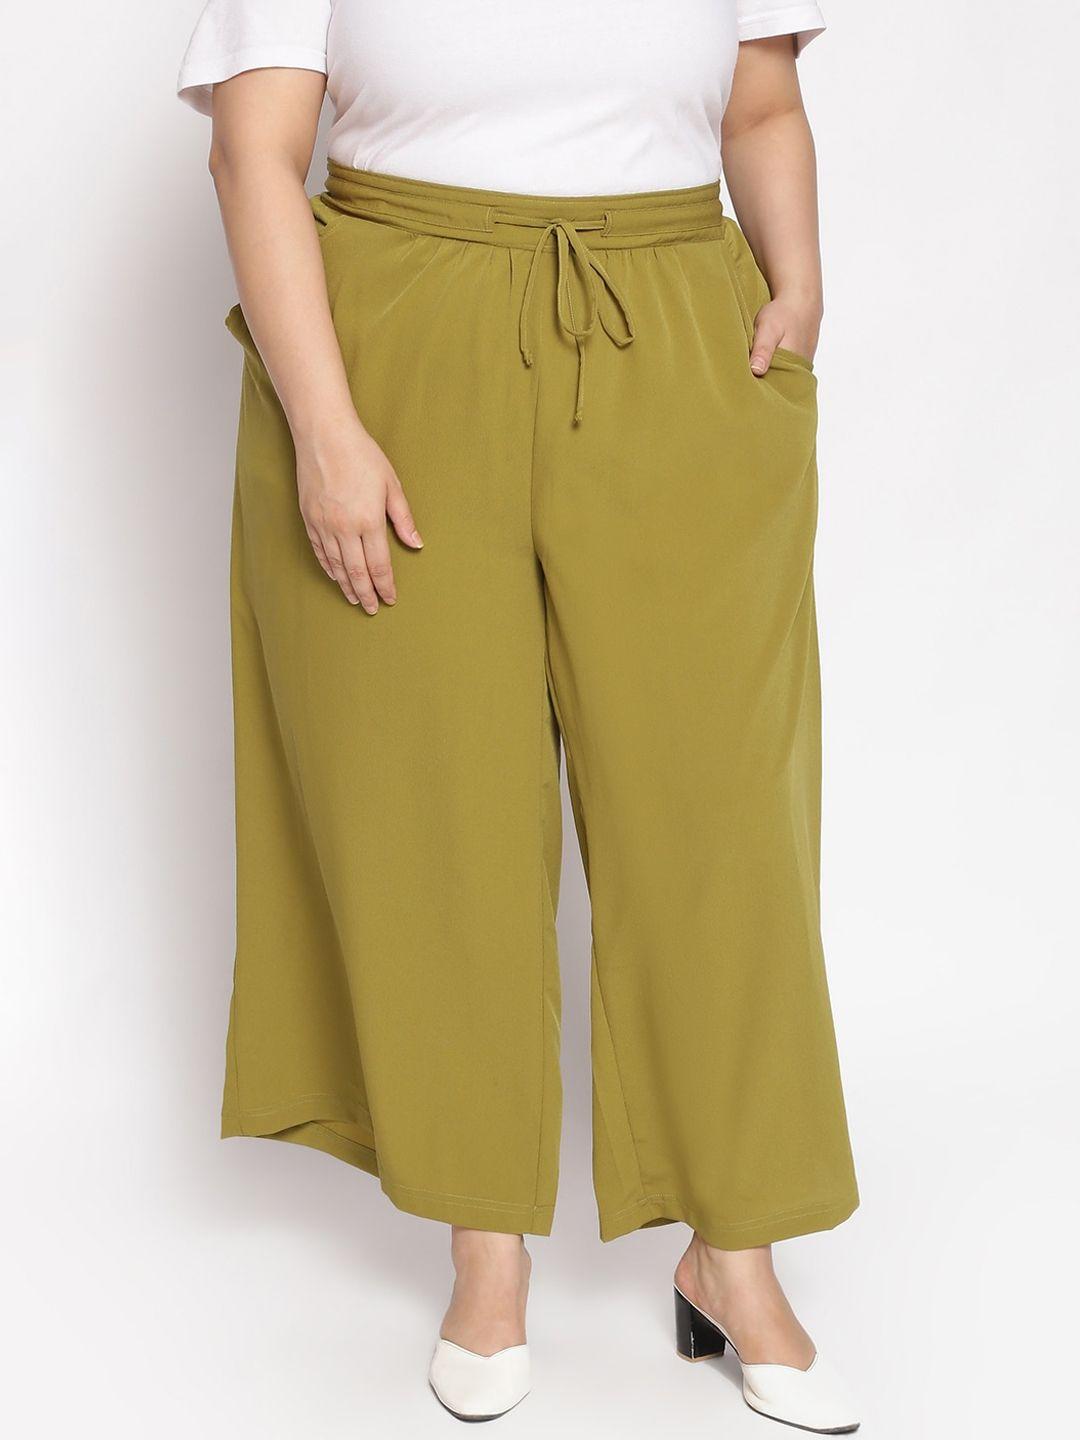 oxolloxo women olive green plus size flared pants